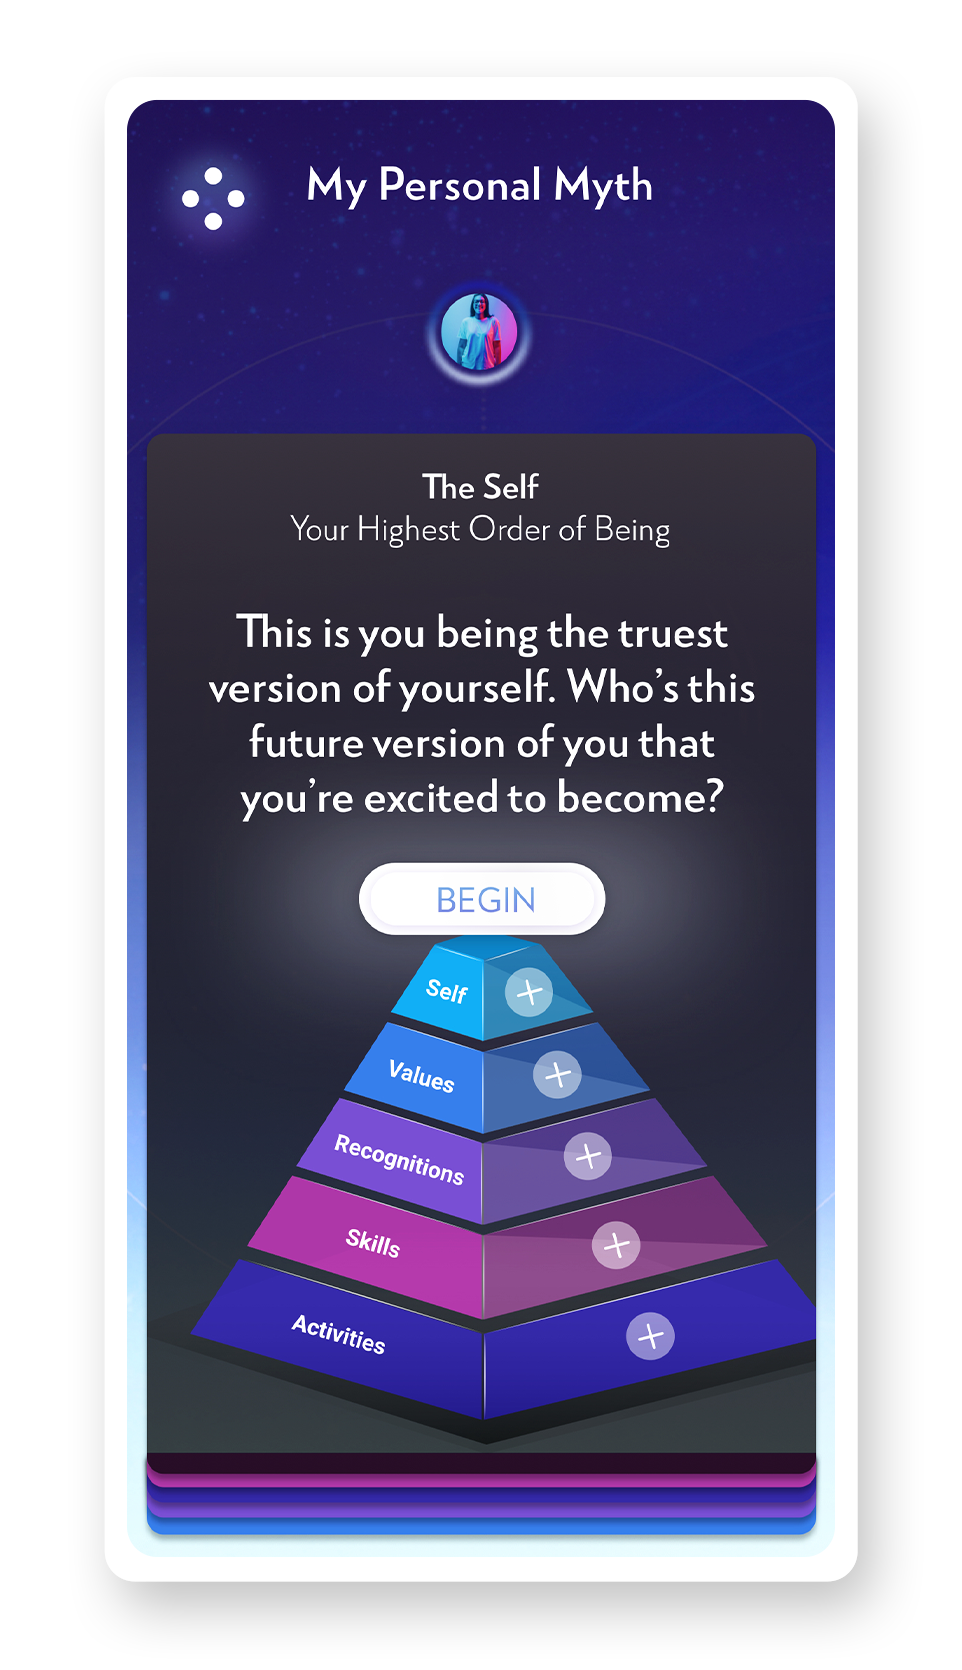 evrmore lets you create your personal myth, build your personal narrative and sense of purpose